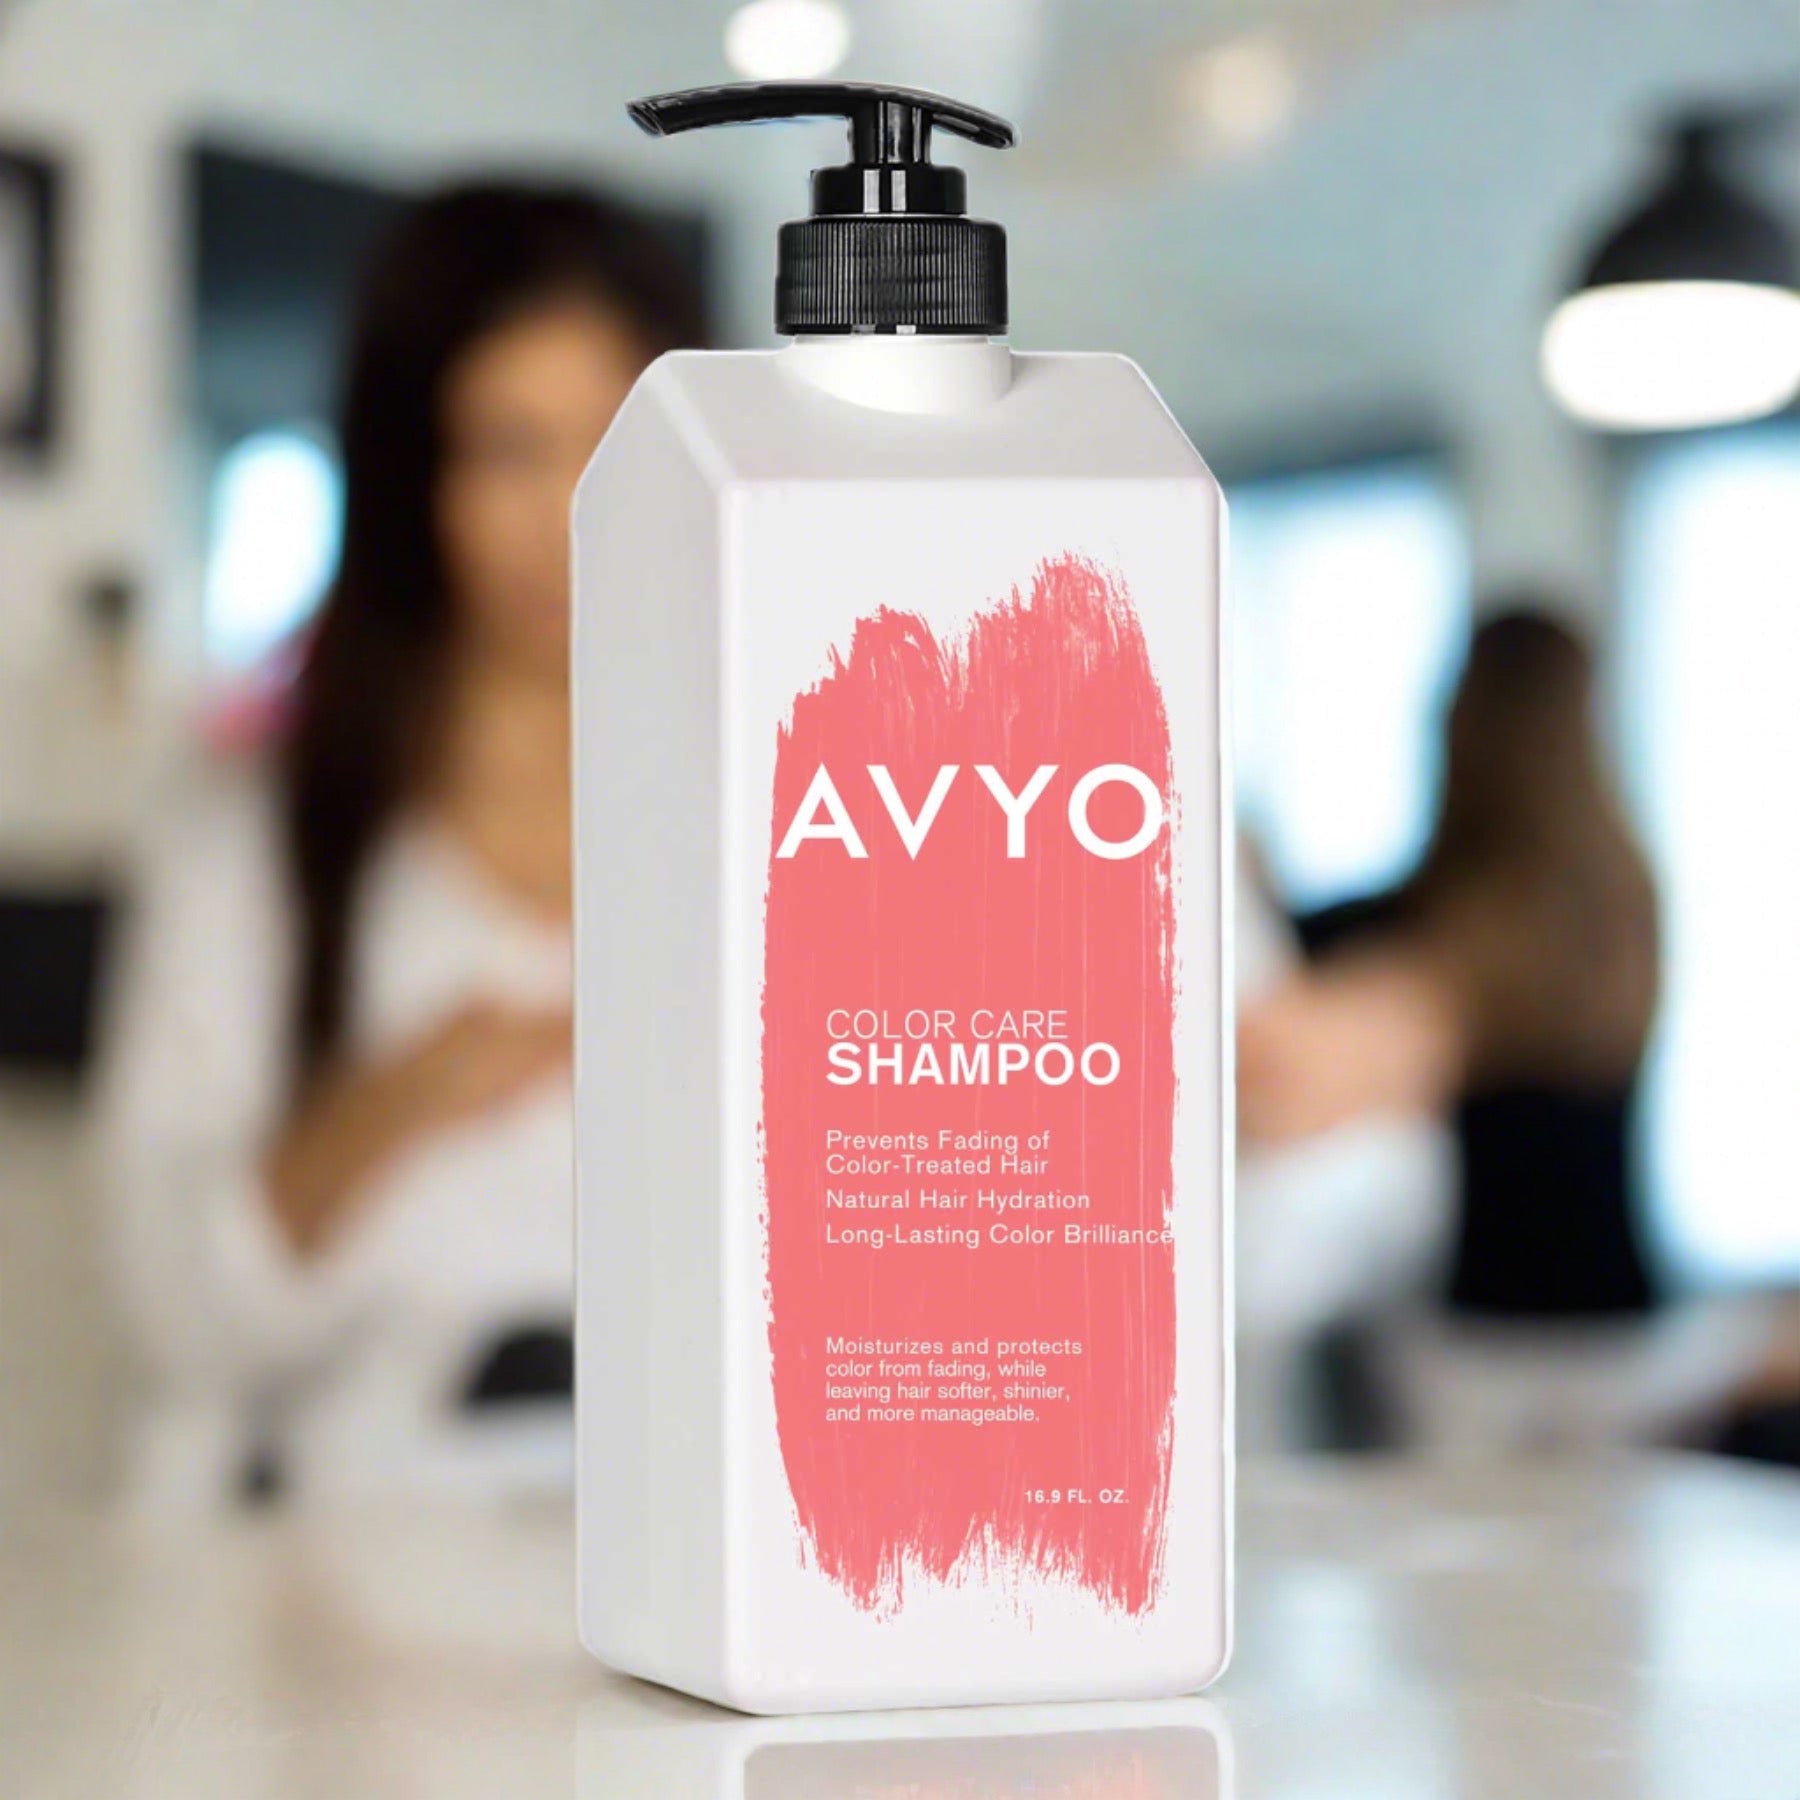 A bottle of AVYO Color Care Shampoo is prominently displayed on a counter with a blurry background featuring a woman in a salon. The white bottle has a bold red brush stroke design, with text that highlights its benefits: prevents fading of color-treated hair, ensures natural hair hydration, and promises long-lasting color brilliance. It contains 16.9 FL OZ and mentions that it moisturizes, protects from fading, and leaves hair softer and more manageable.